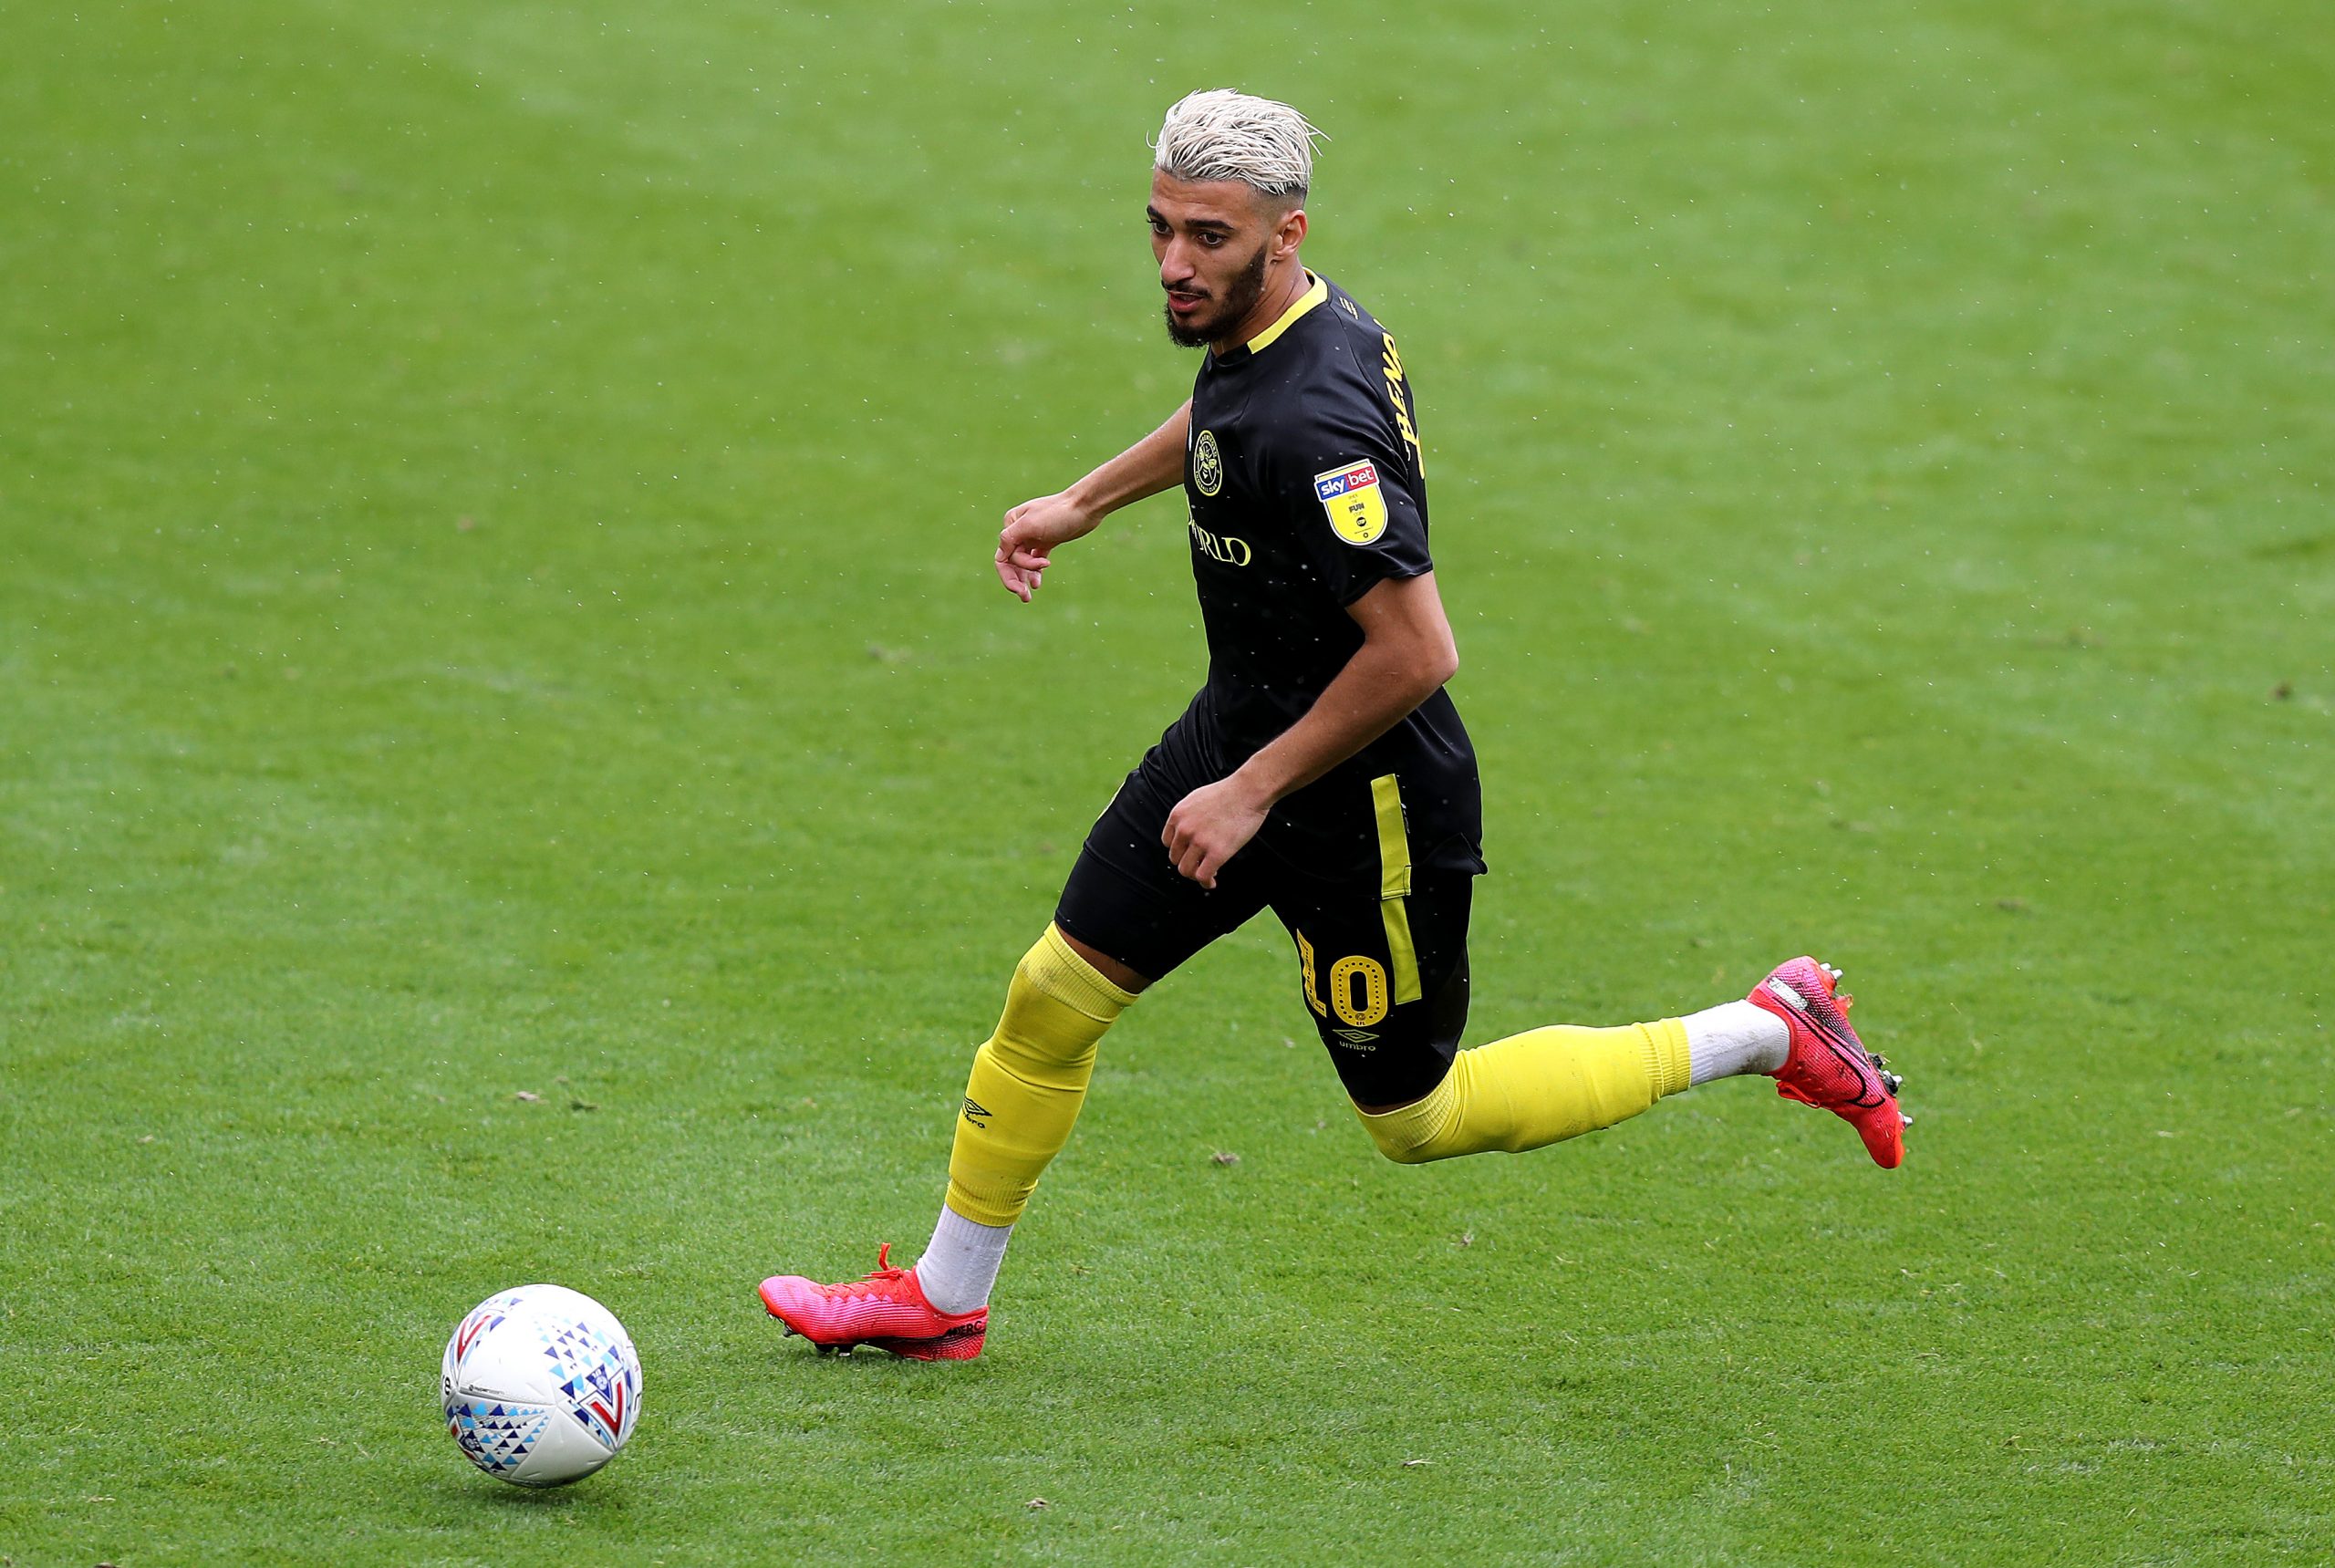 Aston Villa eyeing a late move for Said Benrahma who is in action in the photo